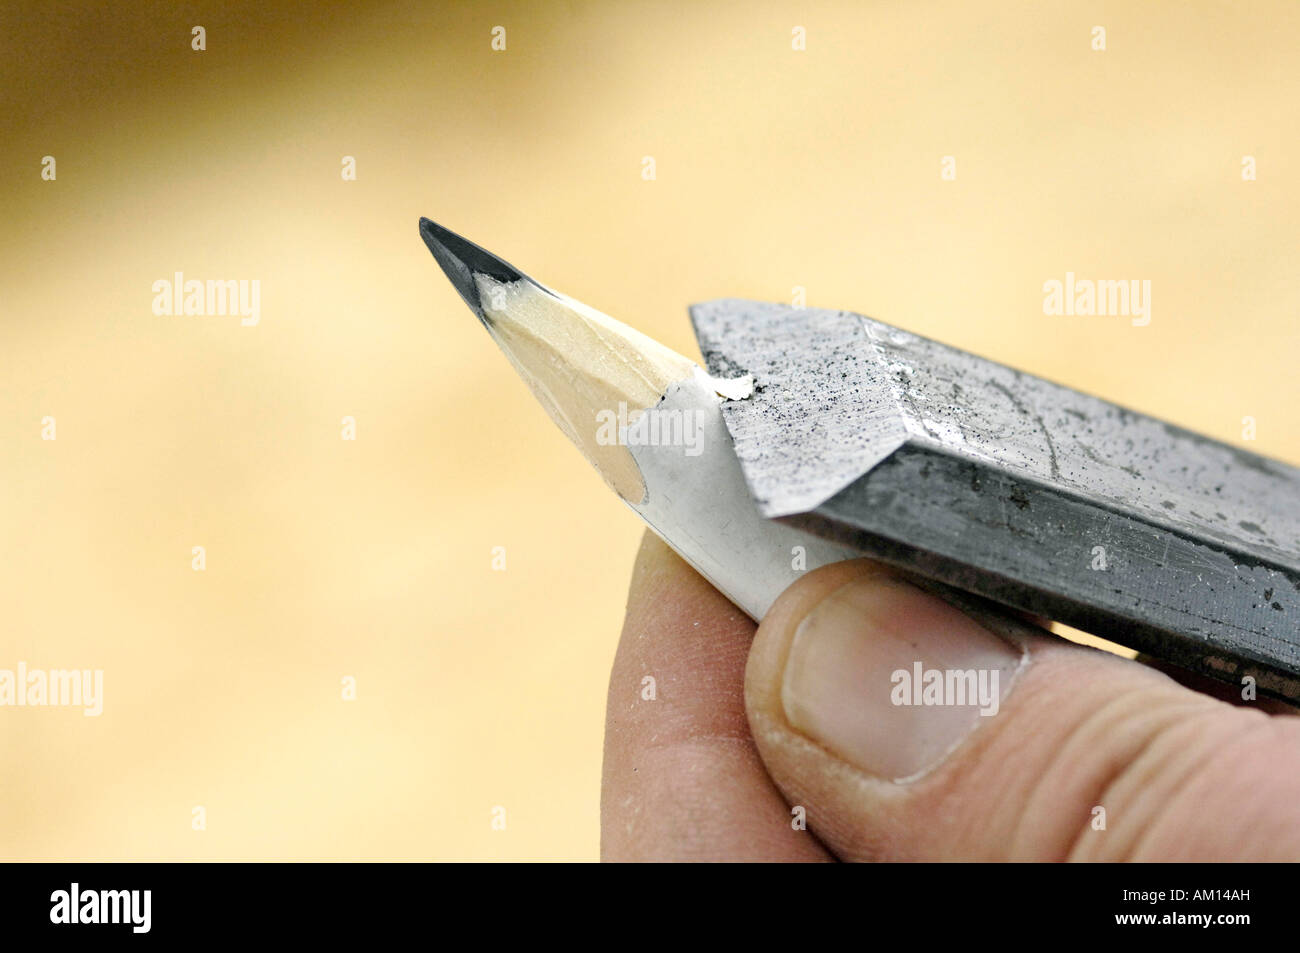 Sharpening a pen with a chisel, Carpentering Stock Photo